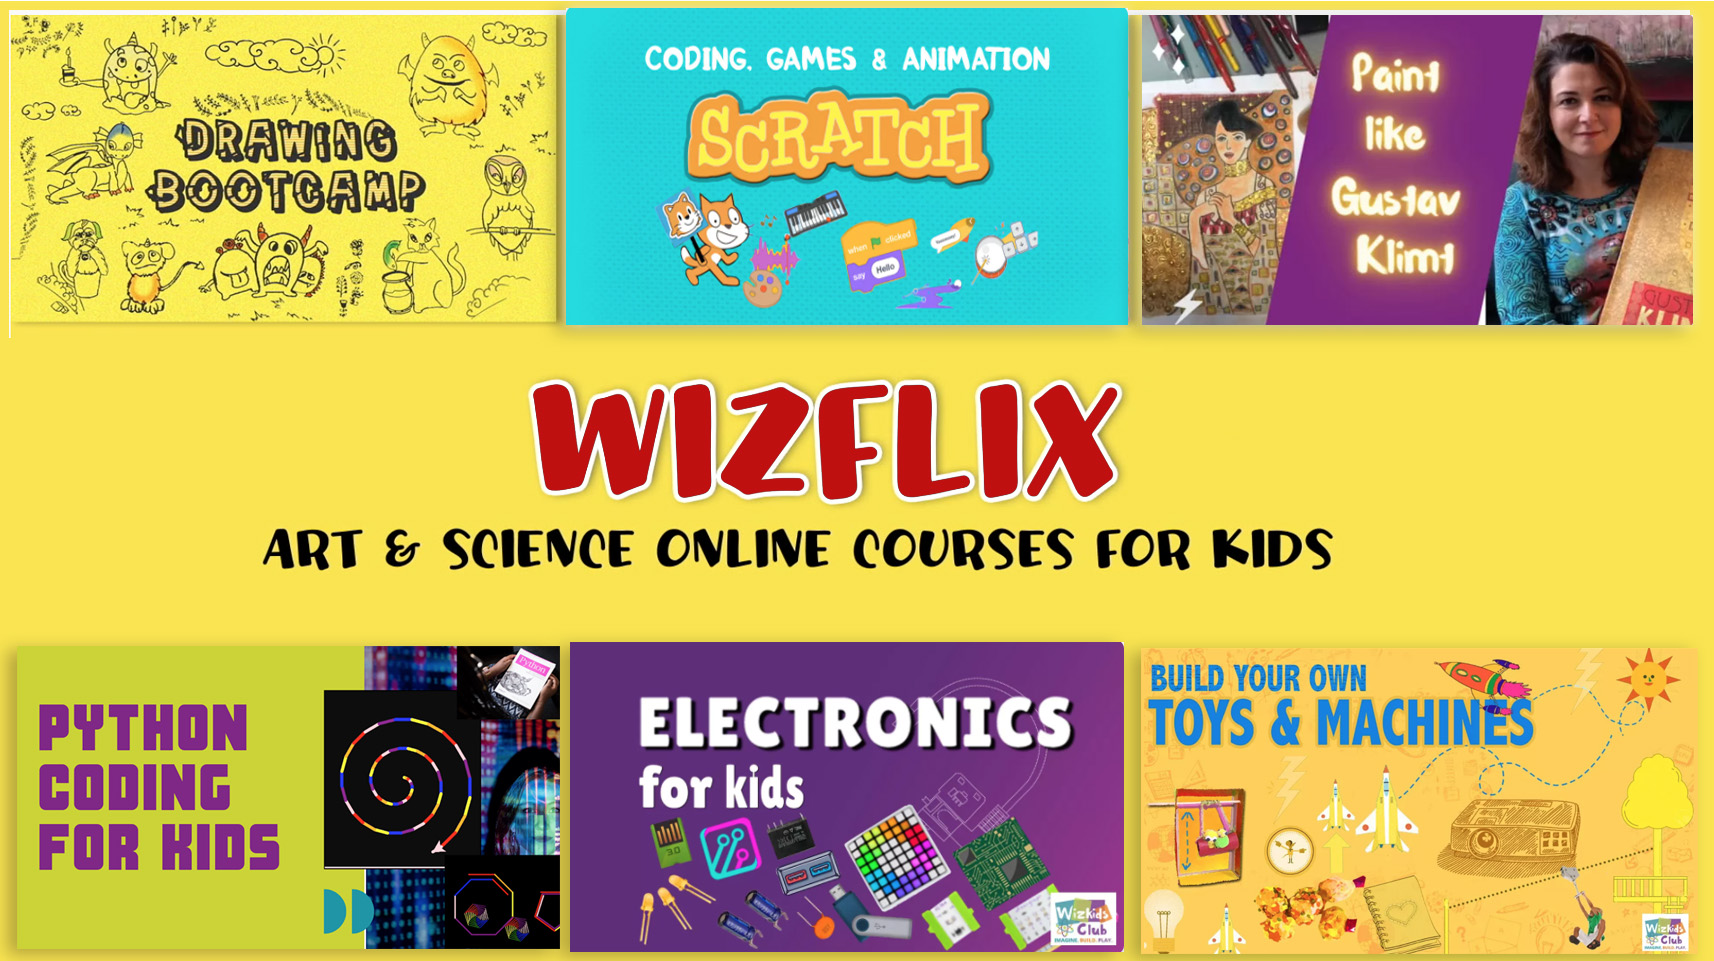 Wizflix art and science online courses for kids